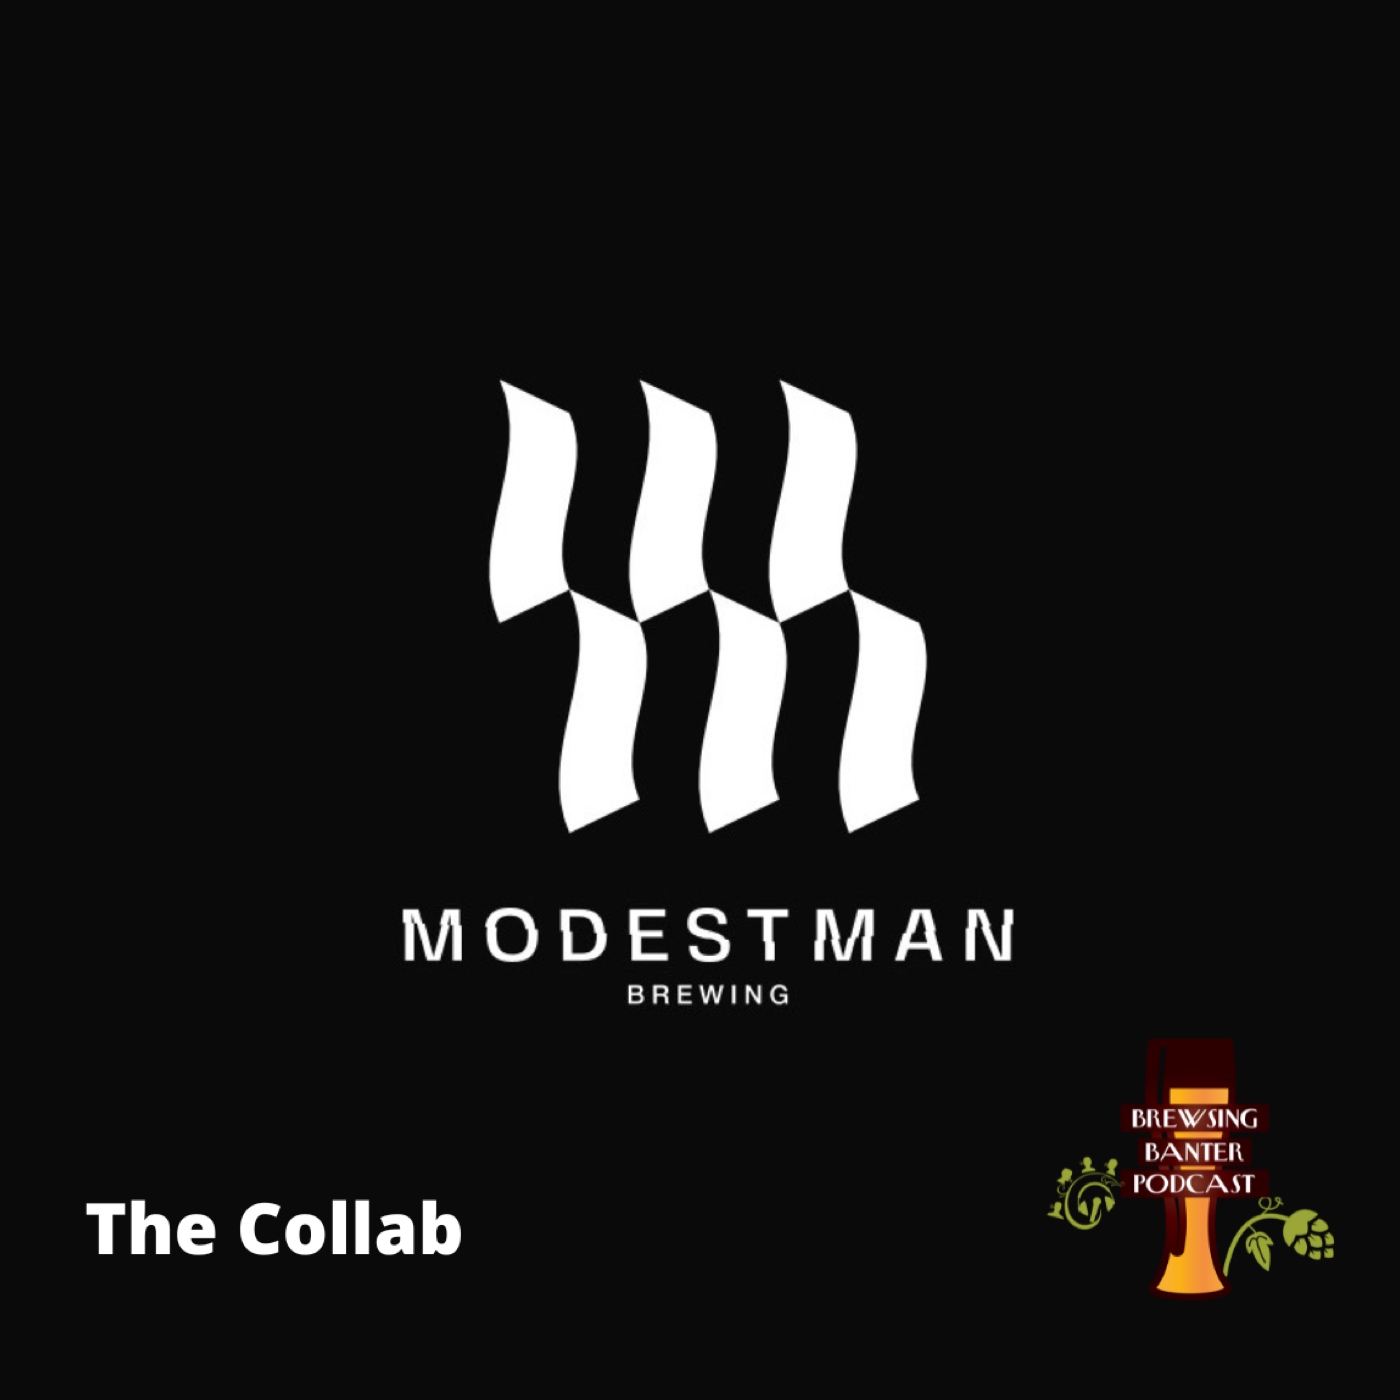 BBP Special - ModestMan Brewing - The Collab Image